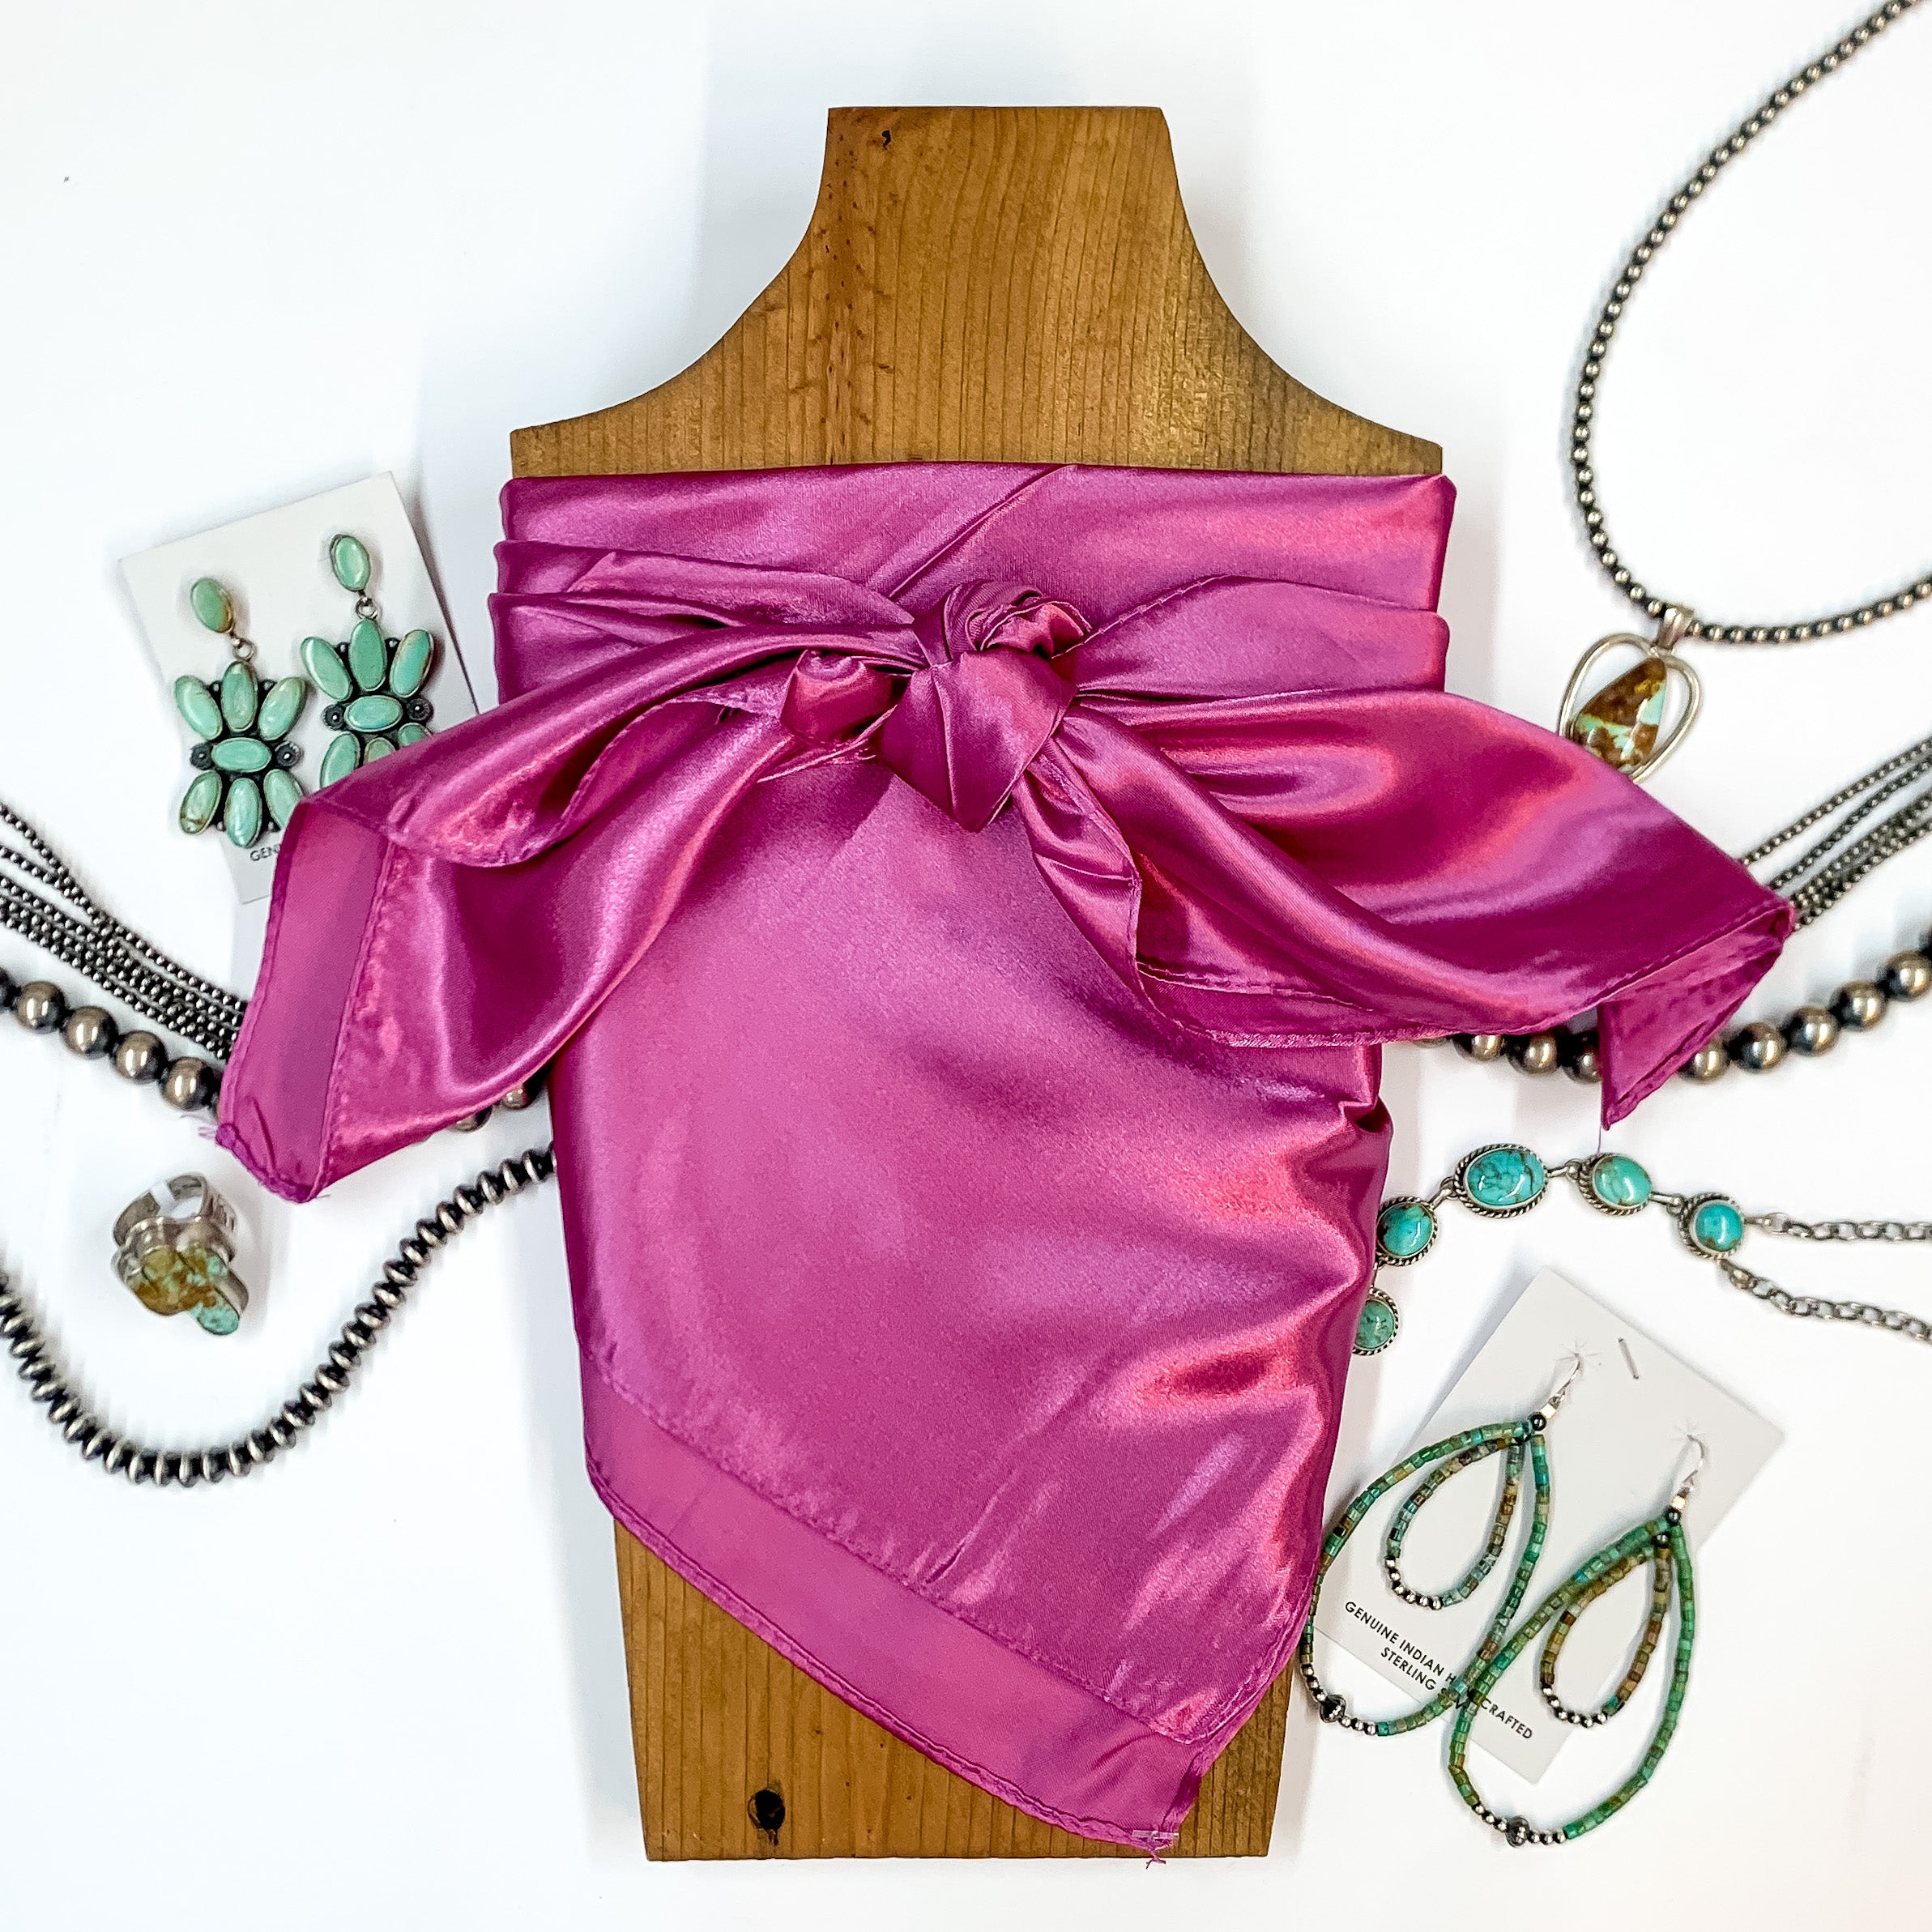 Solid colored scarf in Mauve. Scarf is tied around a wooden piece. The scarf and piece of wood is pictured on a white background with Navajo jewelry spread out around it.